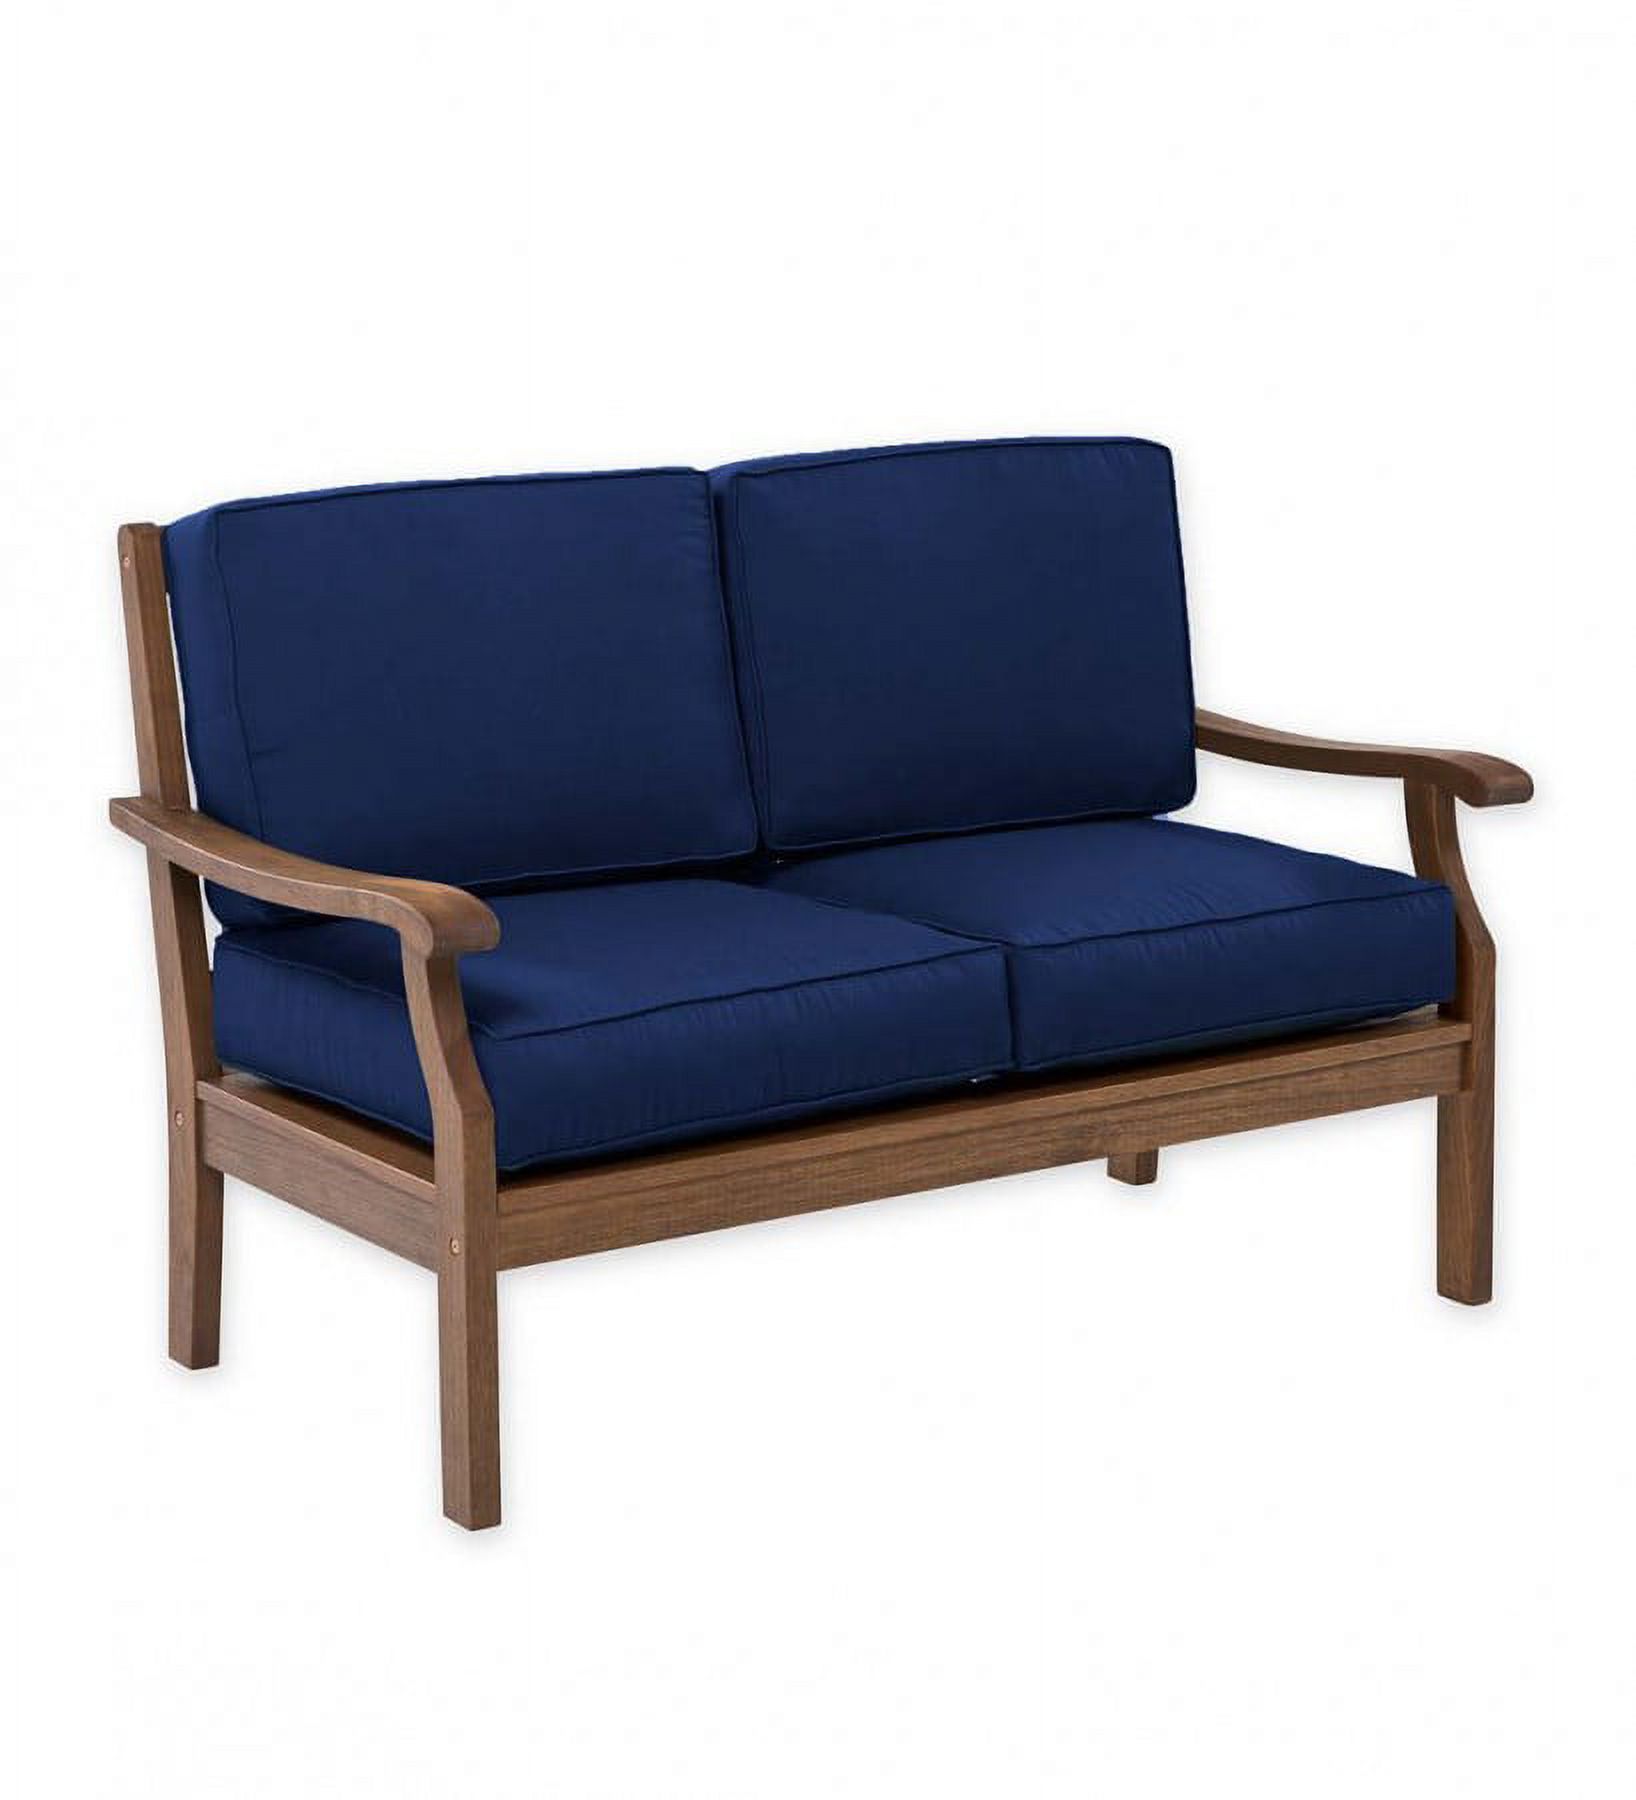 Claremont Deep Seating Love Seat with Cushions - image 1 of 2